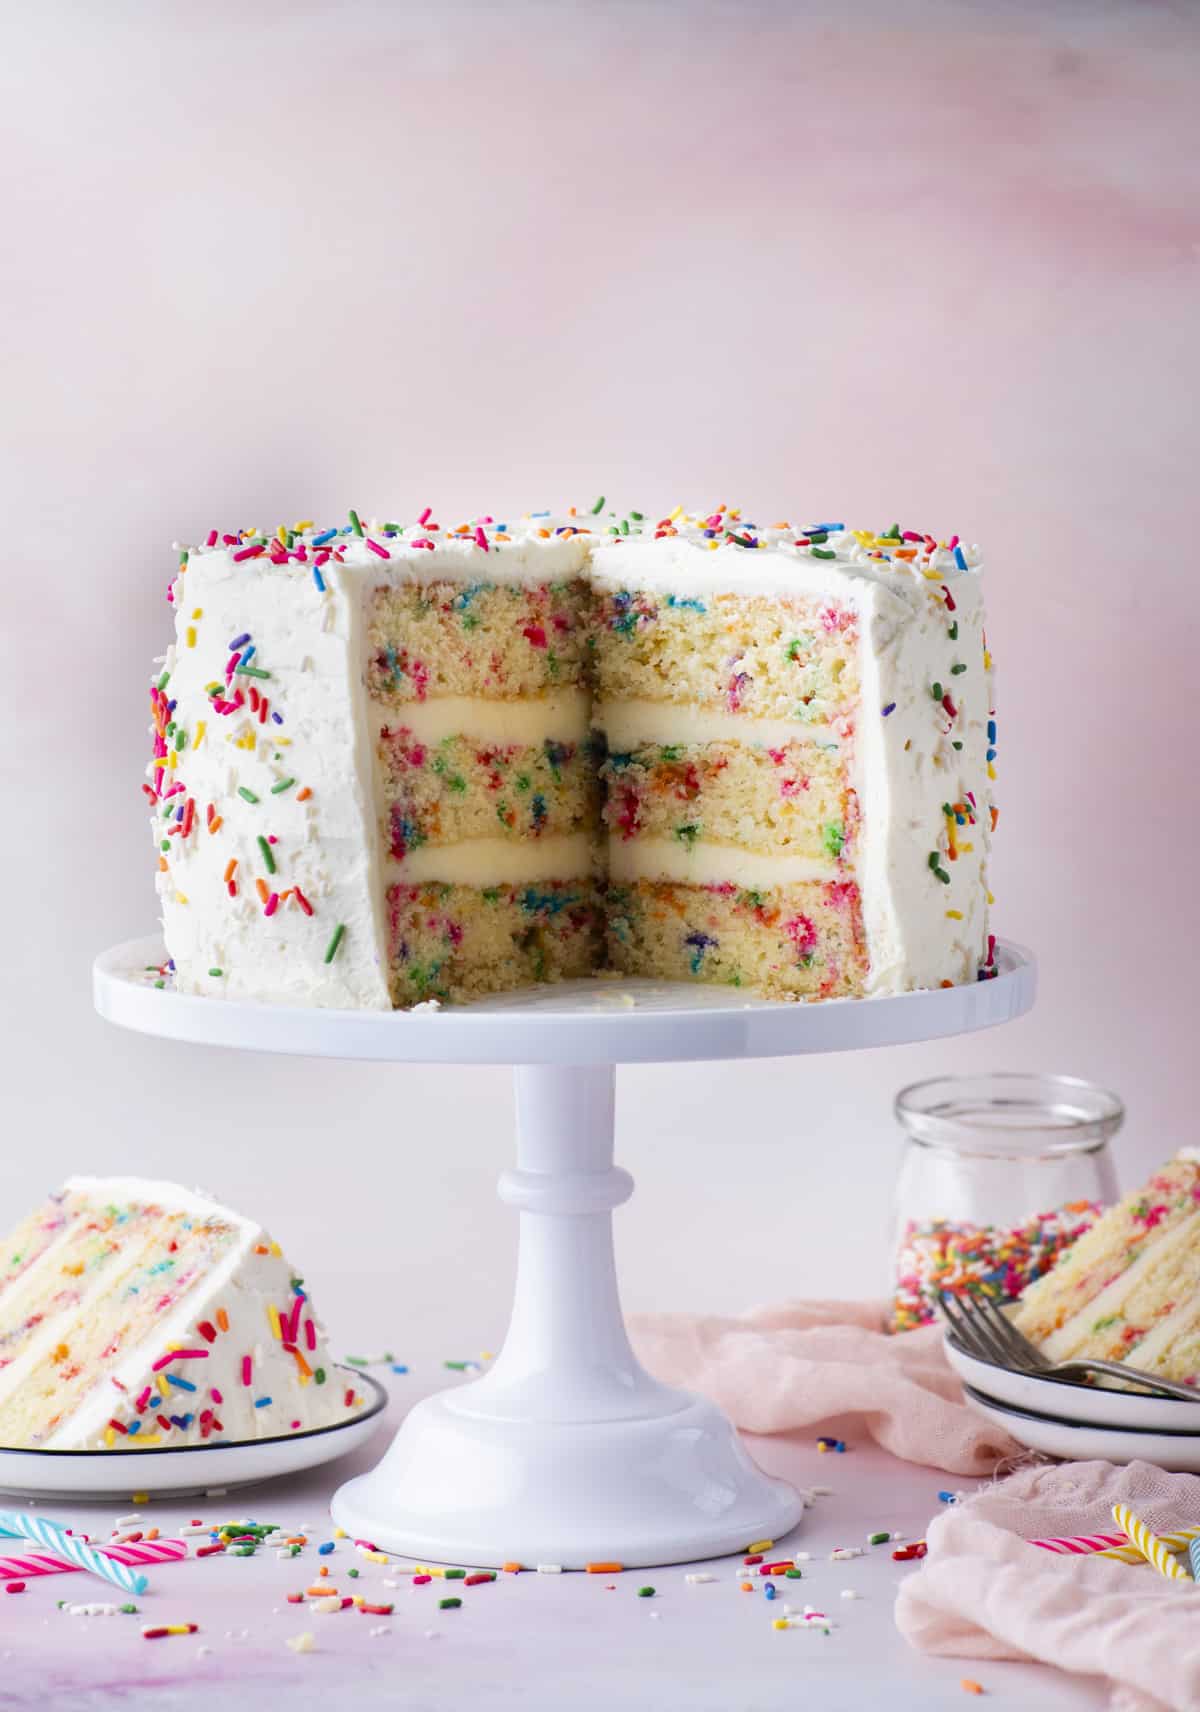 funfetti cake with two slices missing sitting on a white cake stand surrounded by small white plates with the two slices on them, pink towels, birthday candles and scattered sprinkles